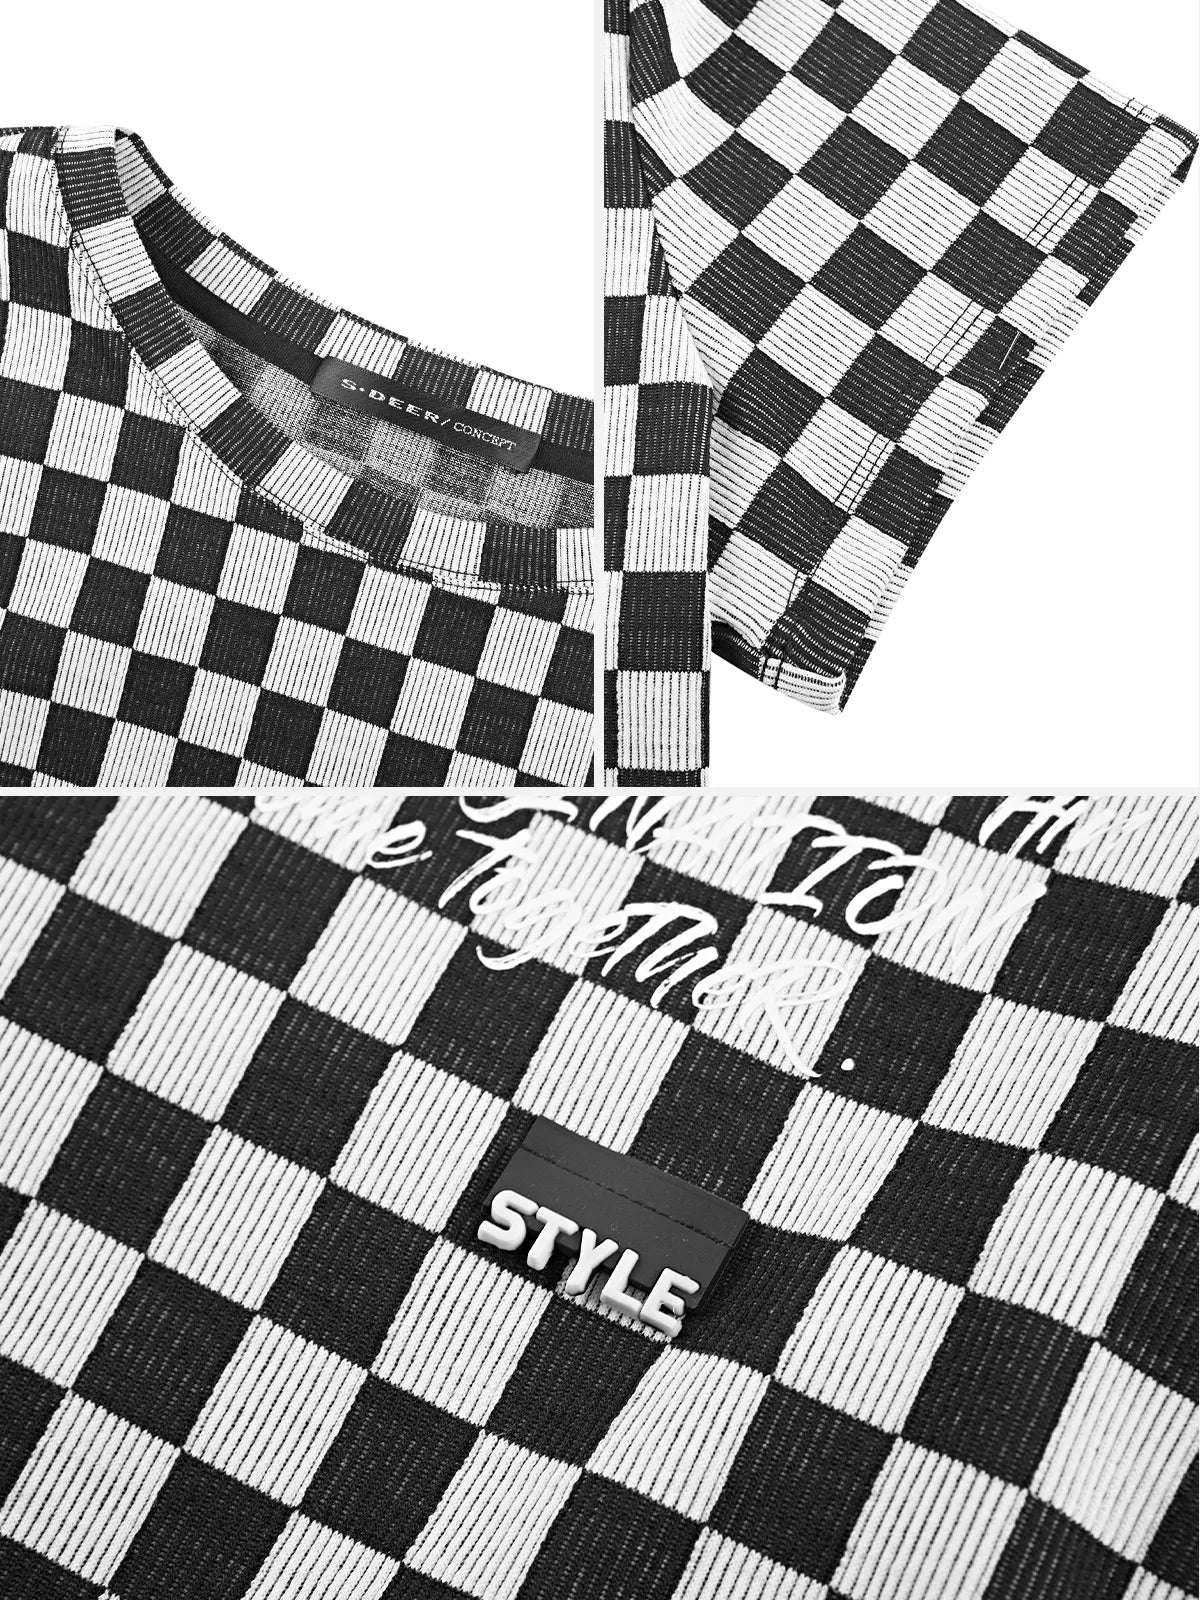 Round Neck Contrasting Check T-Shirt